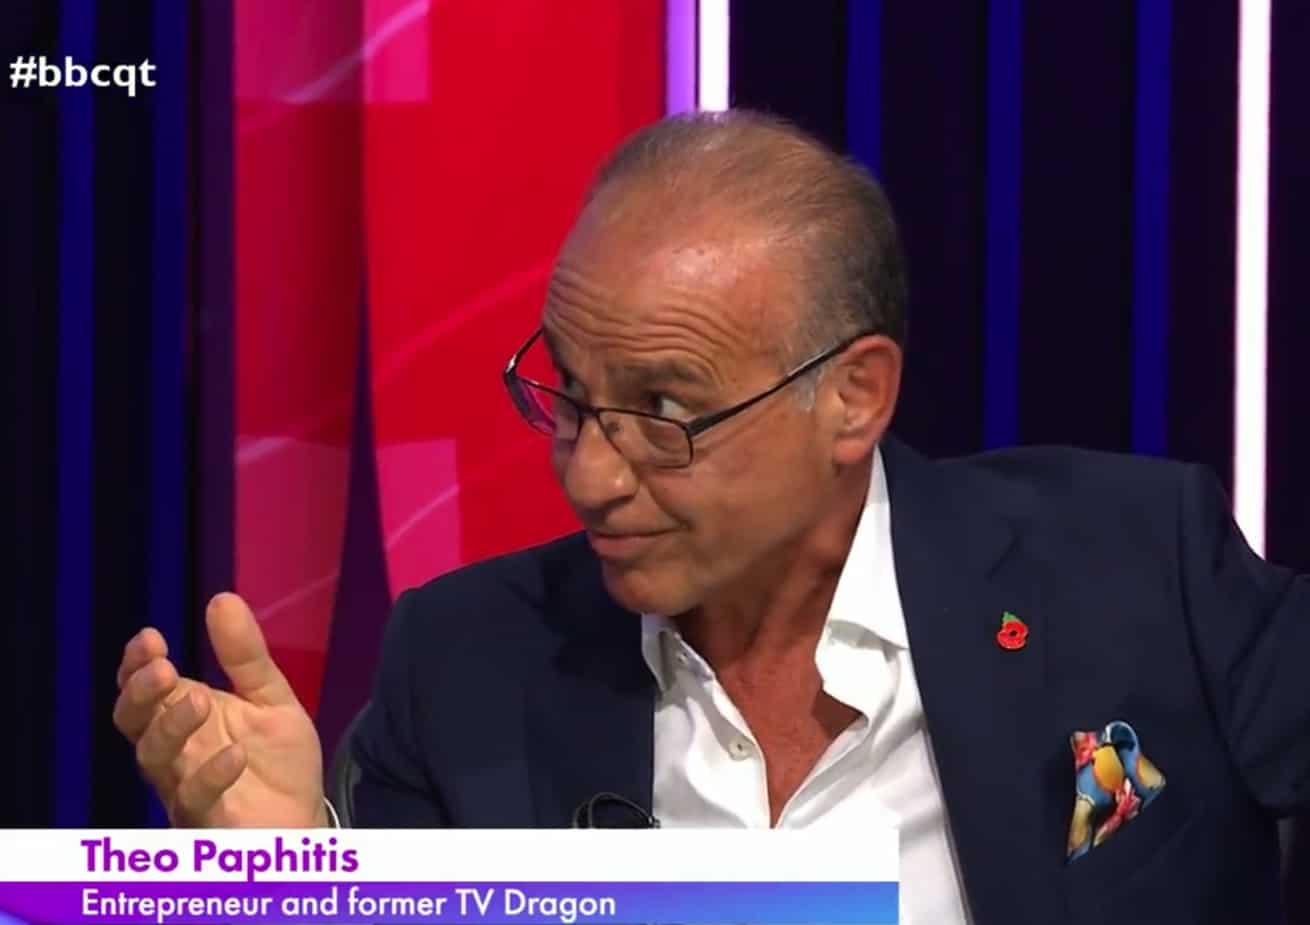 Watch: Theo Paphitis says Tories acting like a ‘tinpot dictatorship’